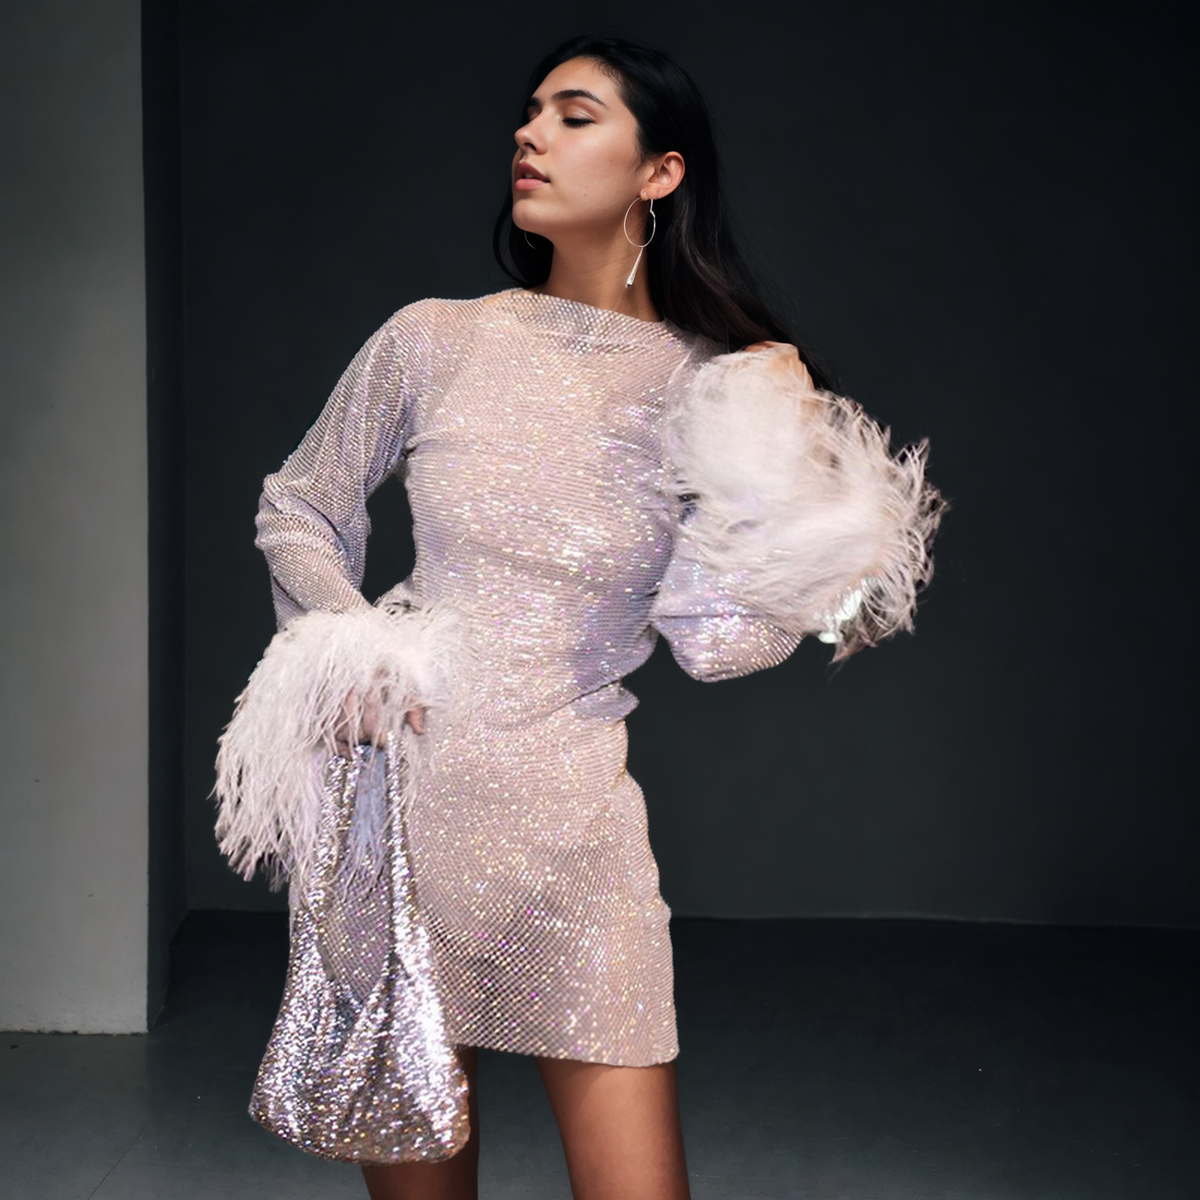 Trendy Autumn: Glittering Mesh Dress with Furry Thin Detail - StylinArts